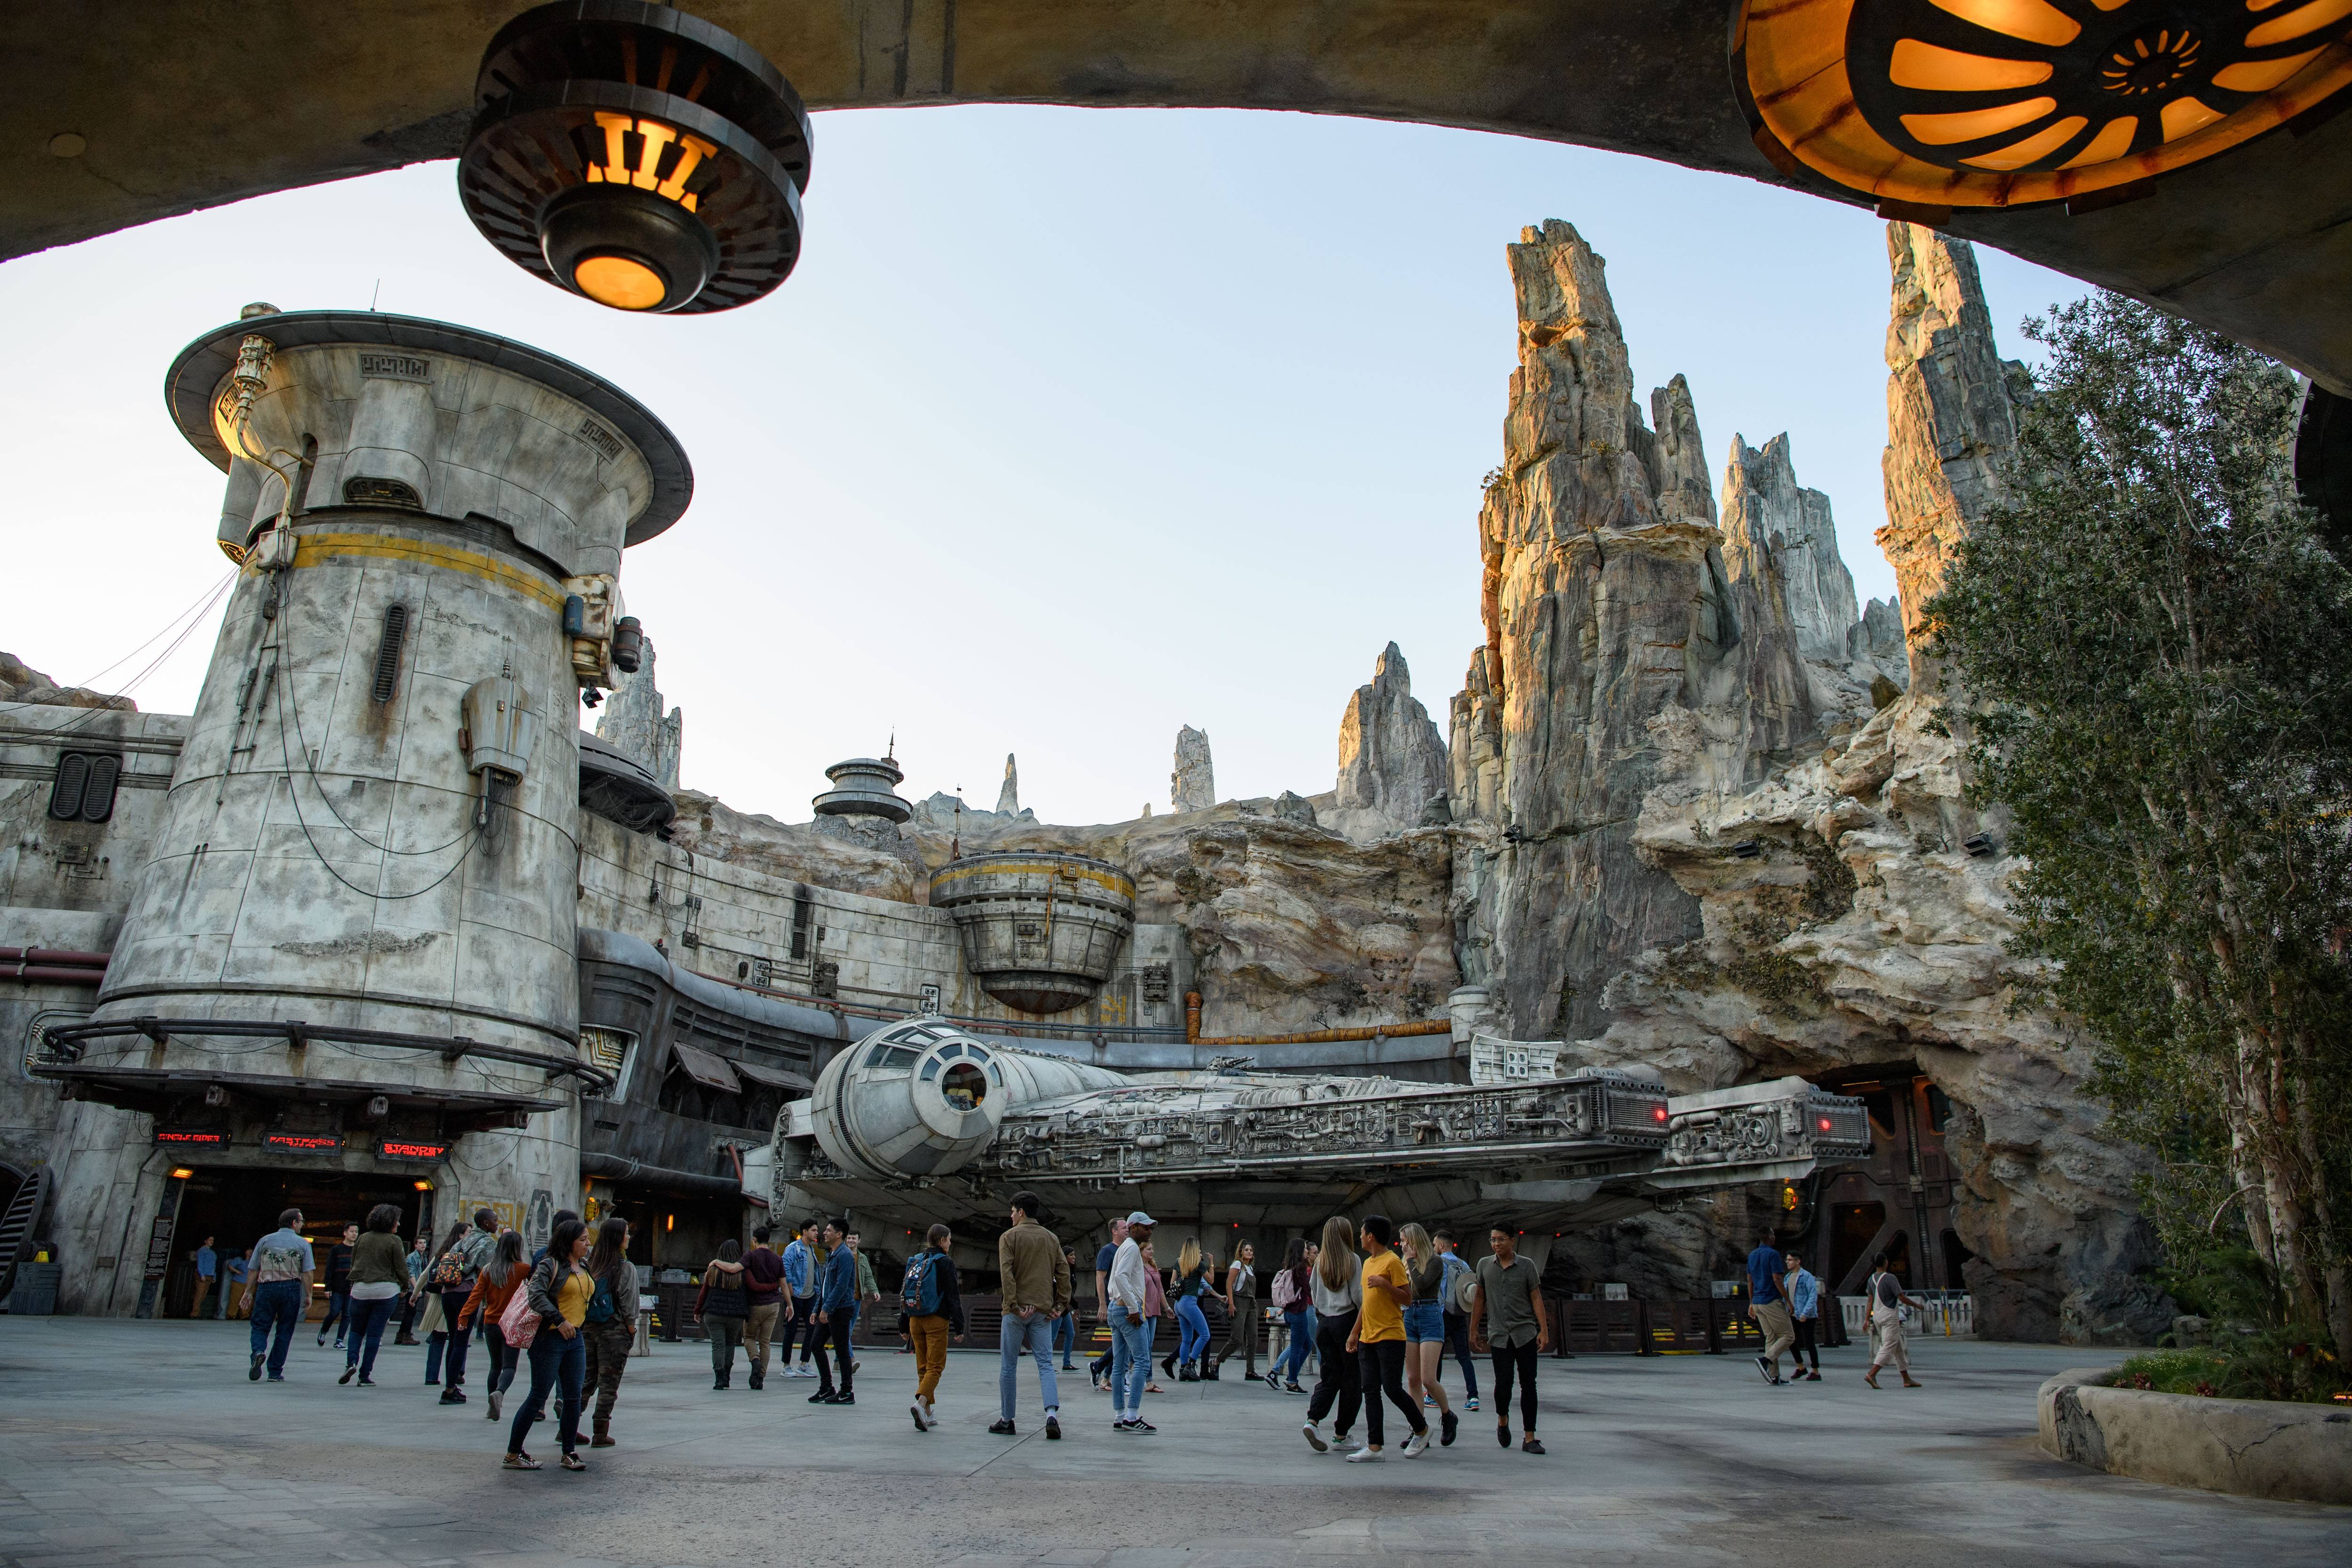 Star Wars Galaxy's Edge is the official name for the upcoming Star Wars land at Disney's Hollywood Studios